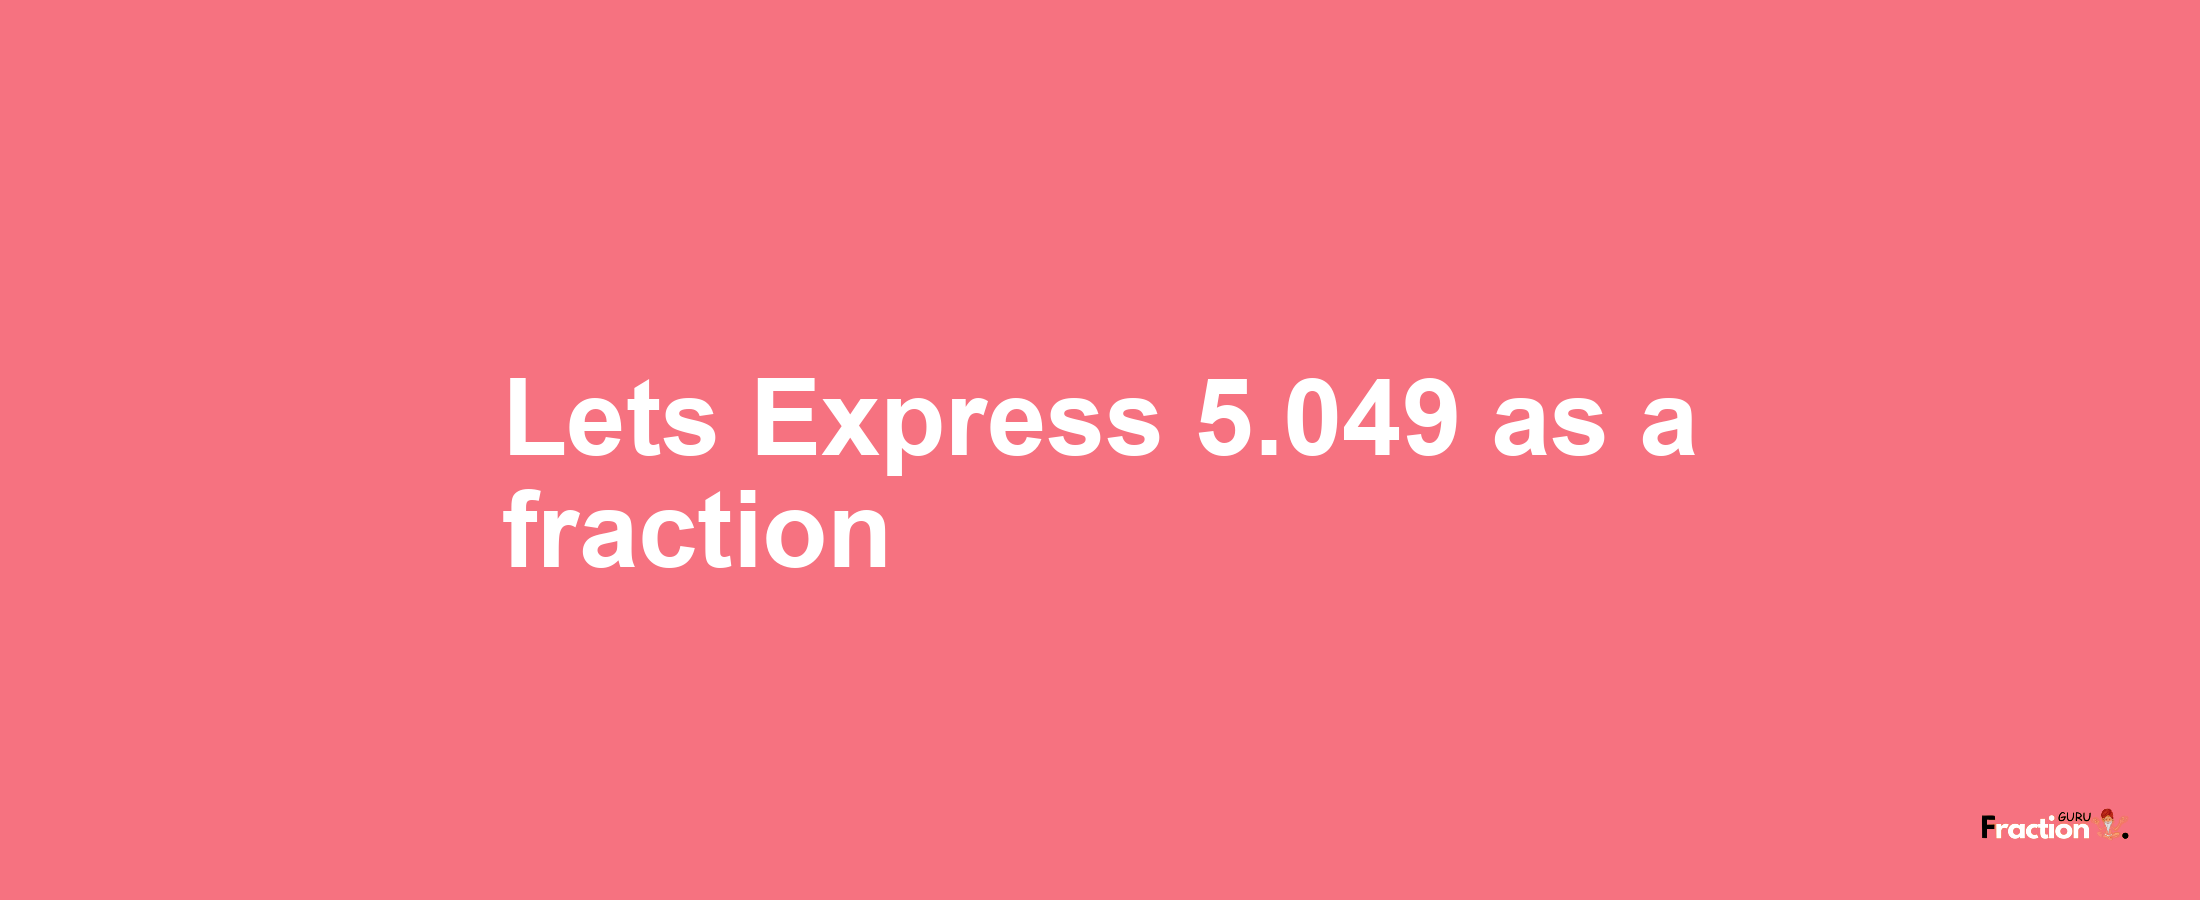 Lets Express 5.049 as afraction